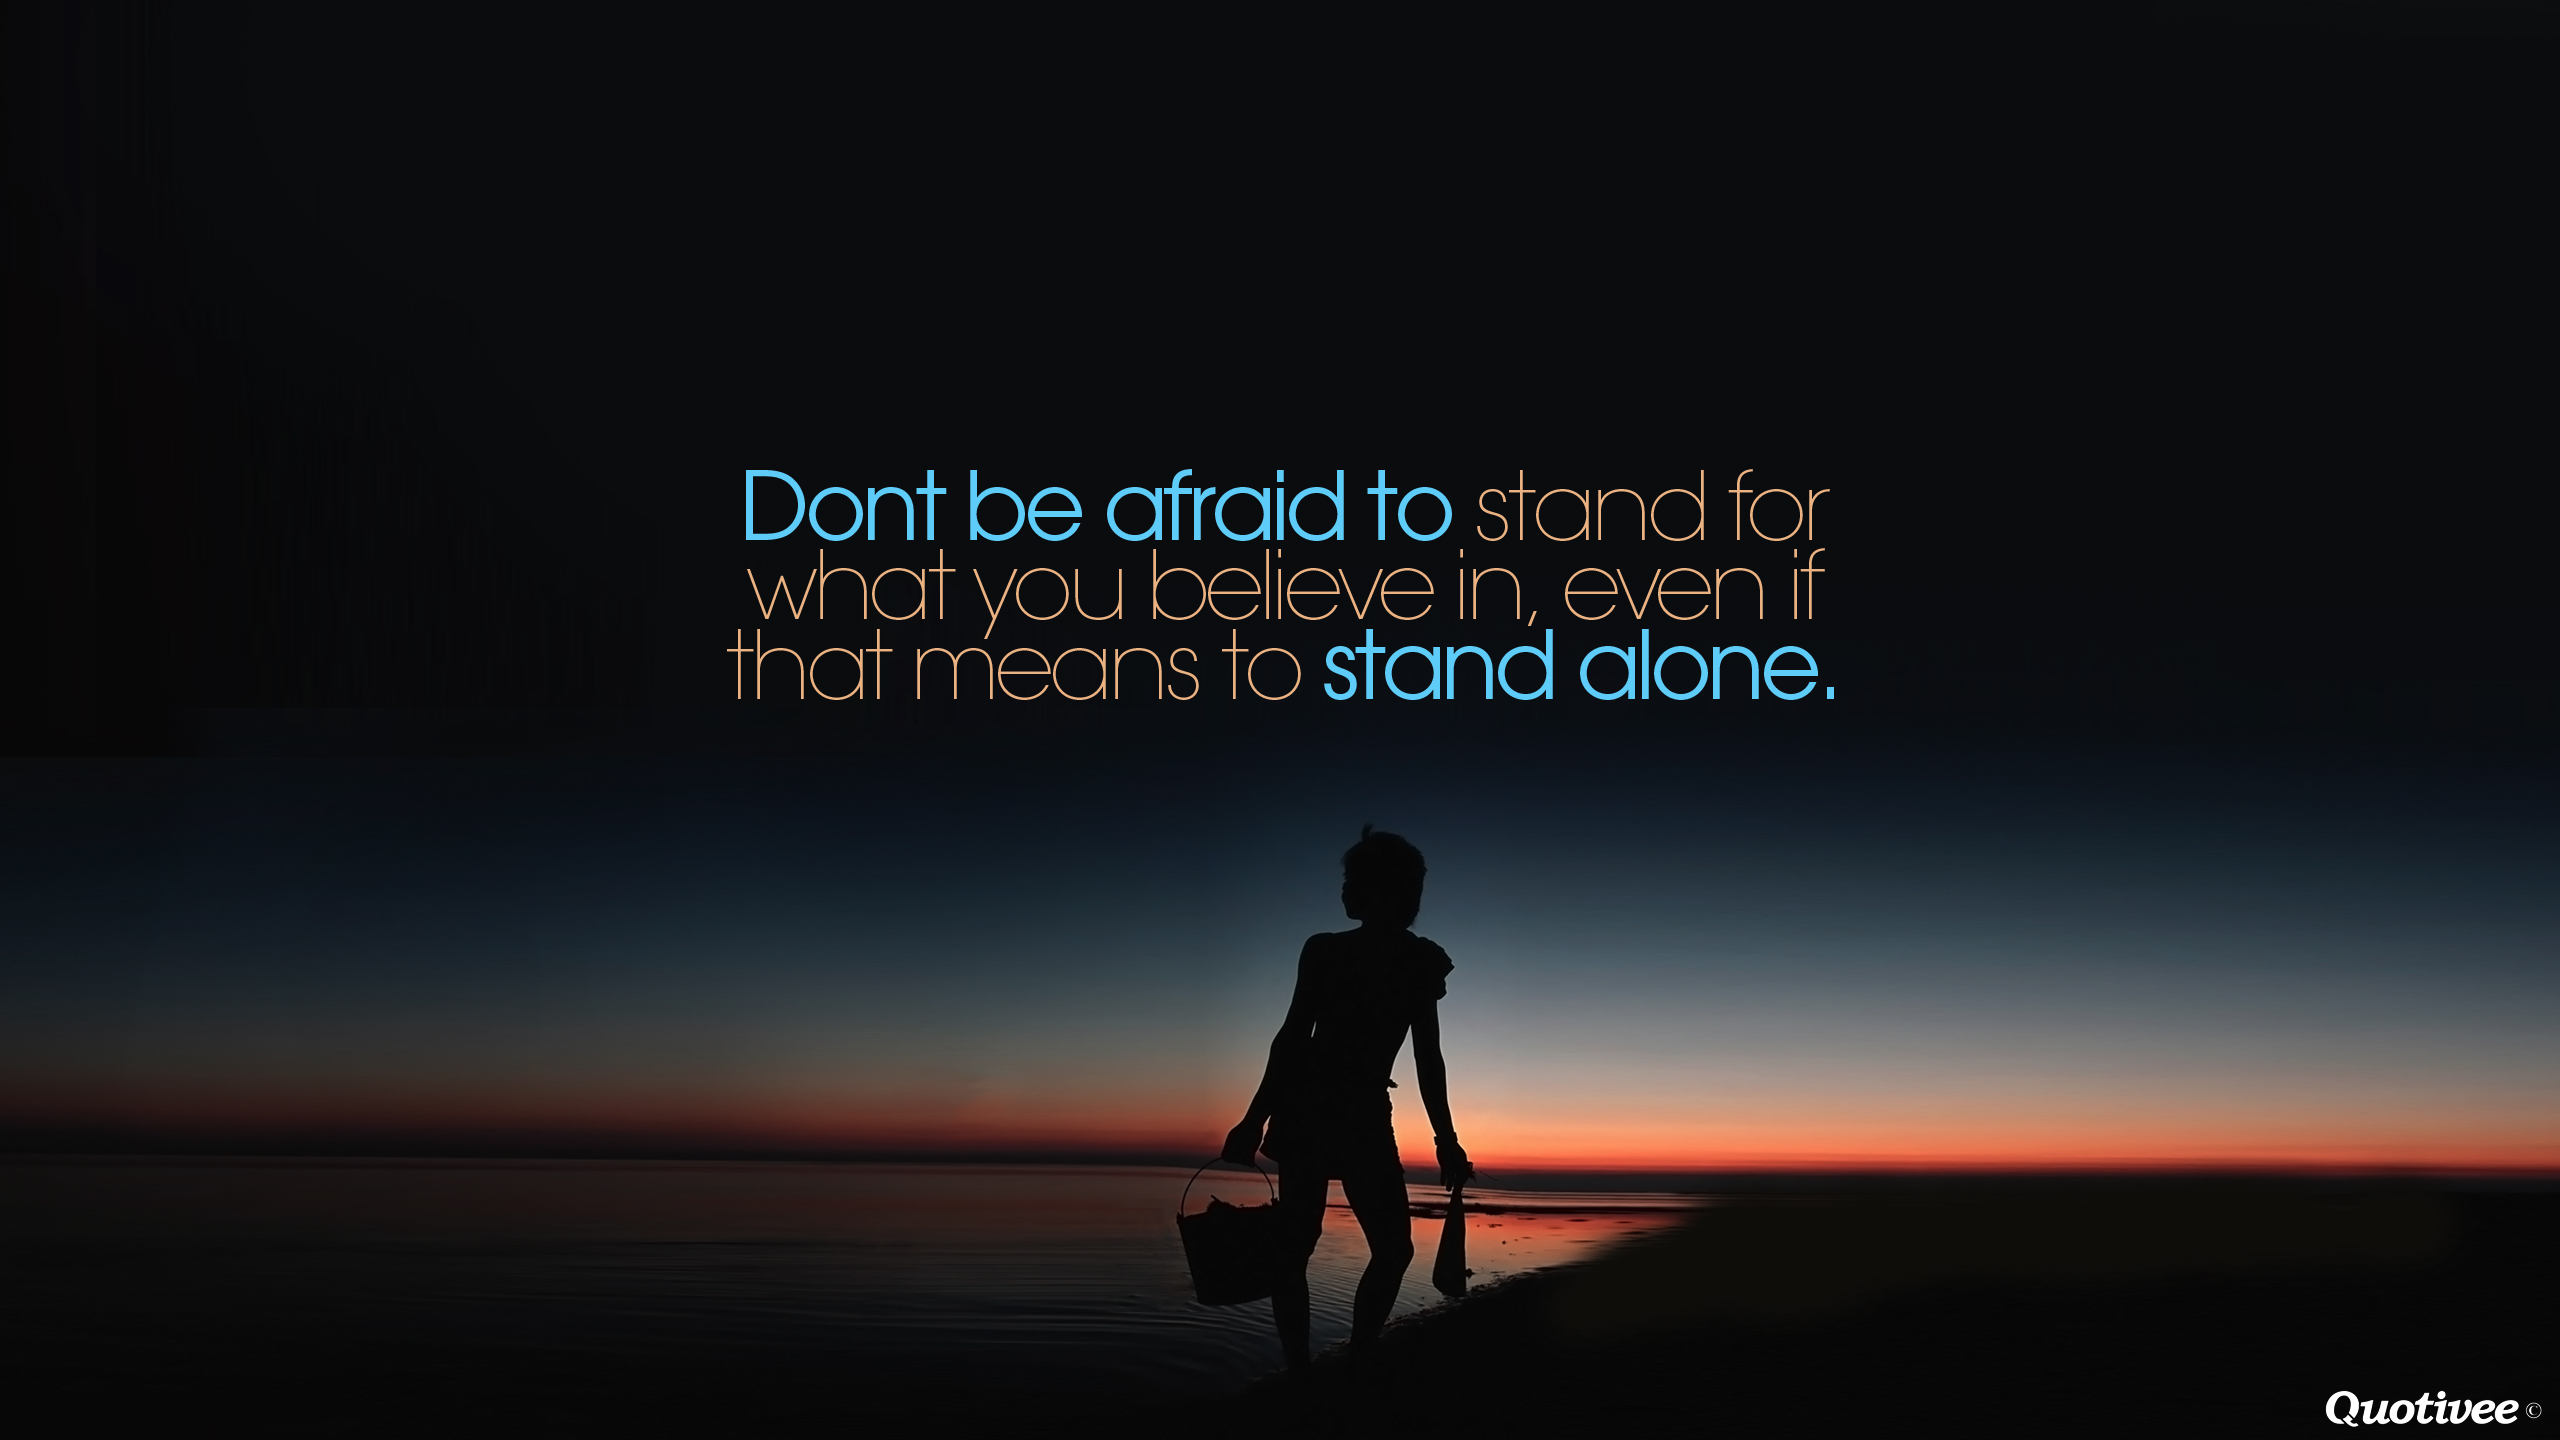 Don't be Afraid to Stand Alone - Inspirational Quotes | Quotivee